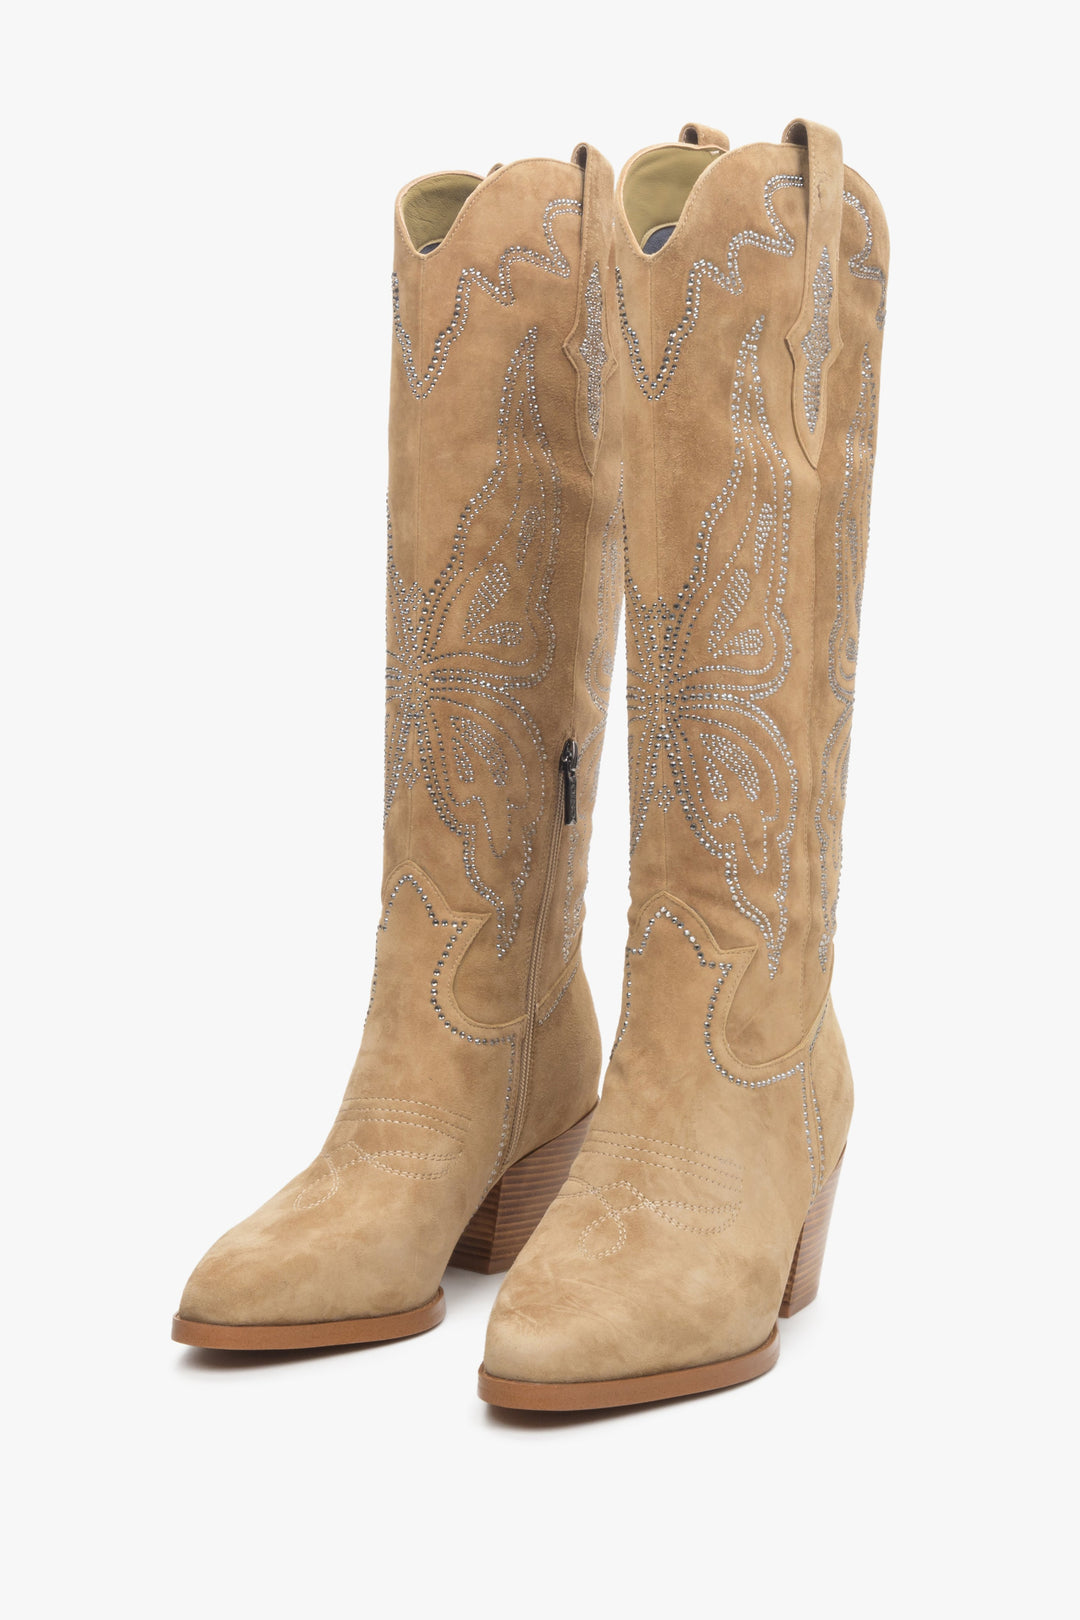 Light beige elevated women's cowboy boots made of velvet by Estro - close-up on the front of the shoe.